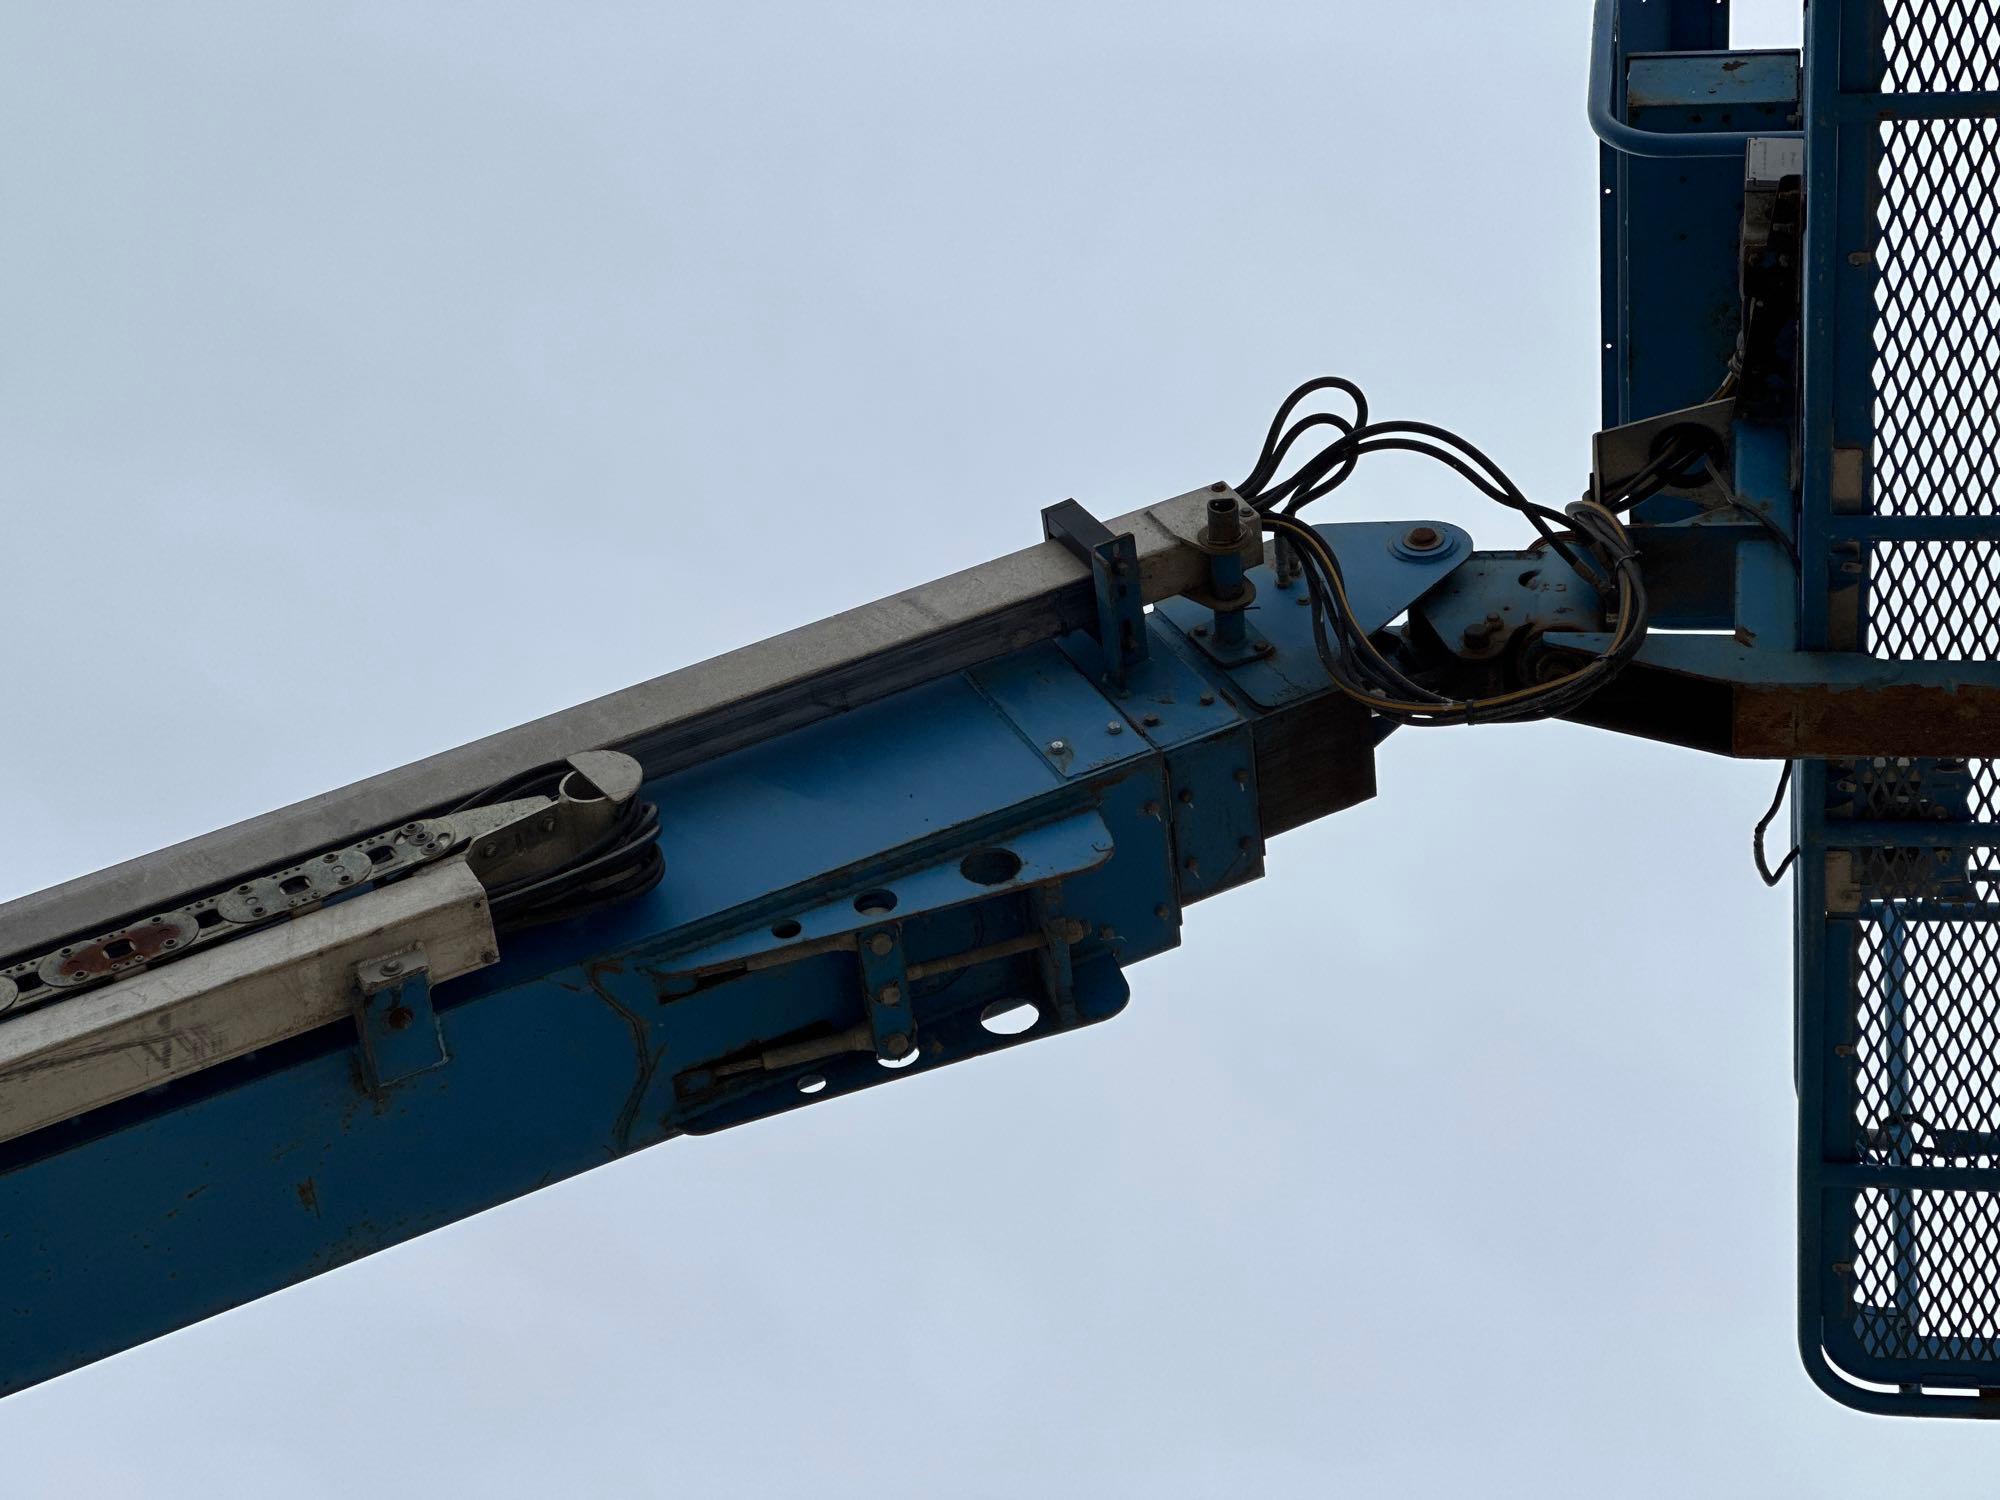 GENIE S60 BOOM LIFT SN:600614307 4x4, powered by diesel engine, equipped with 60ft. Platform height,